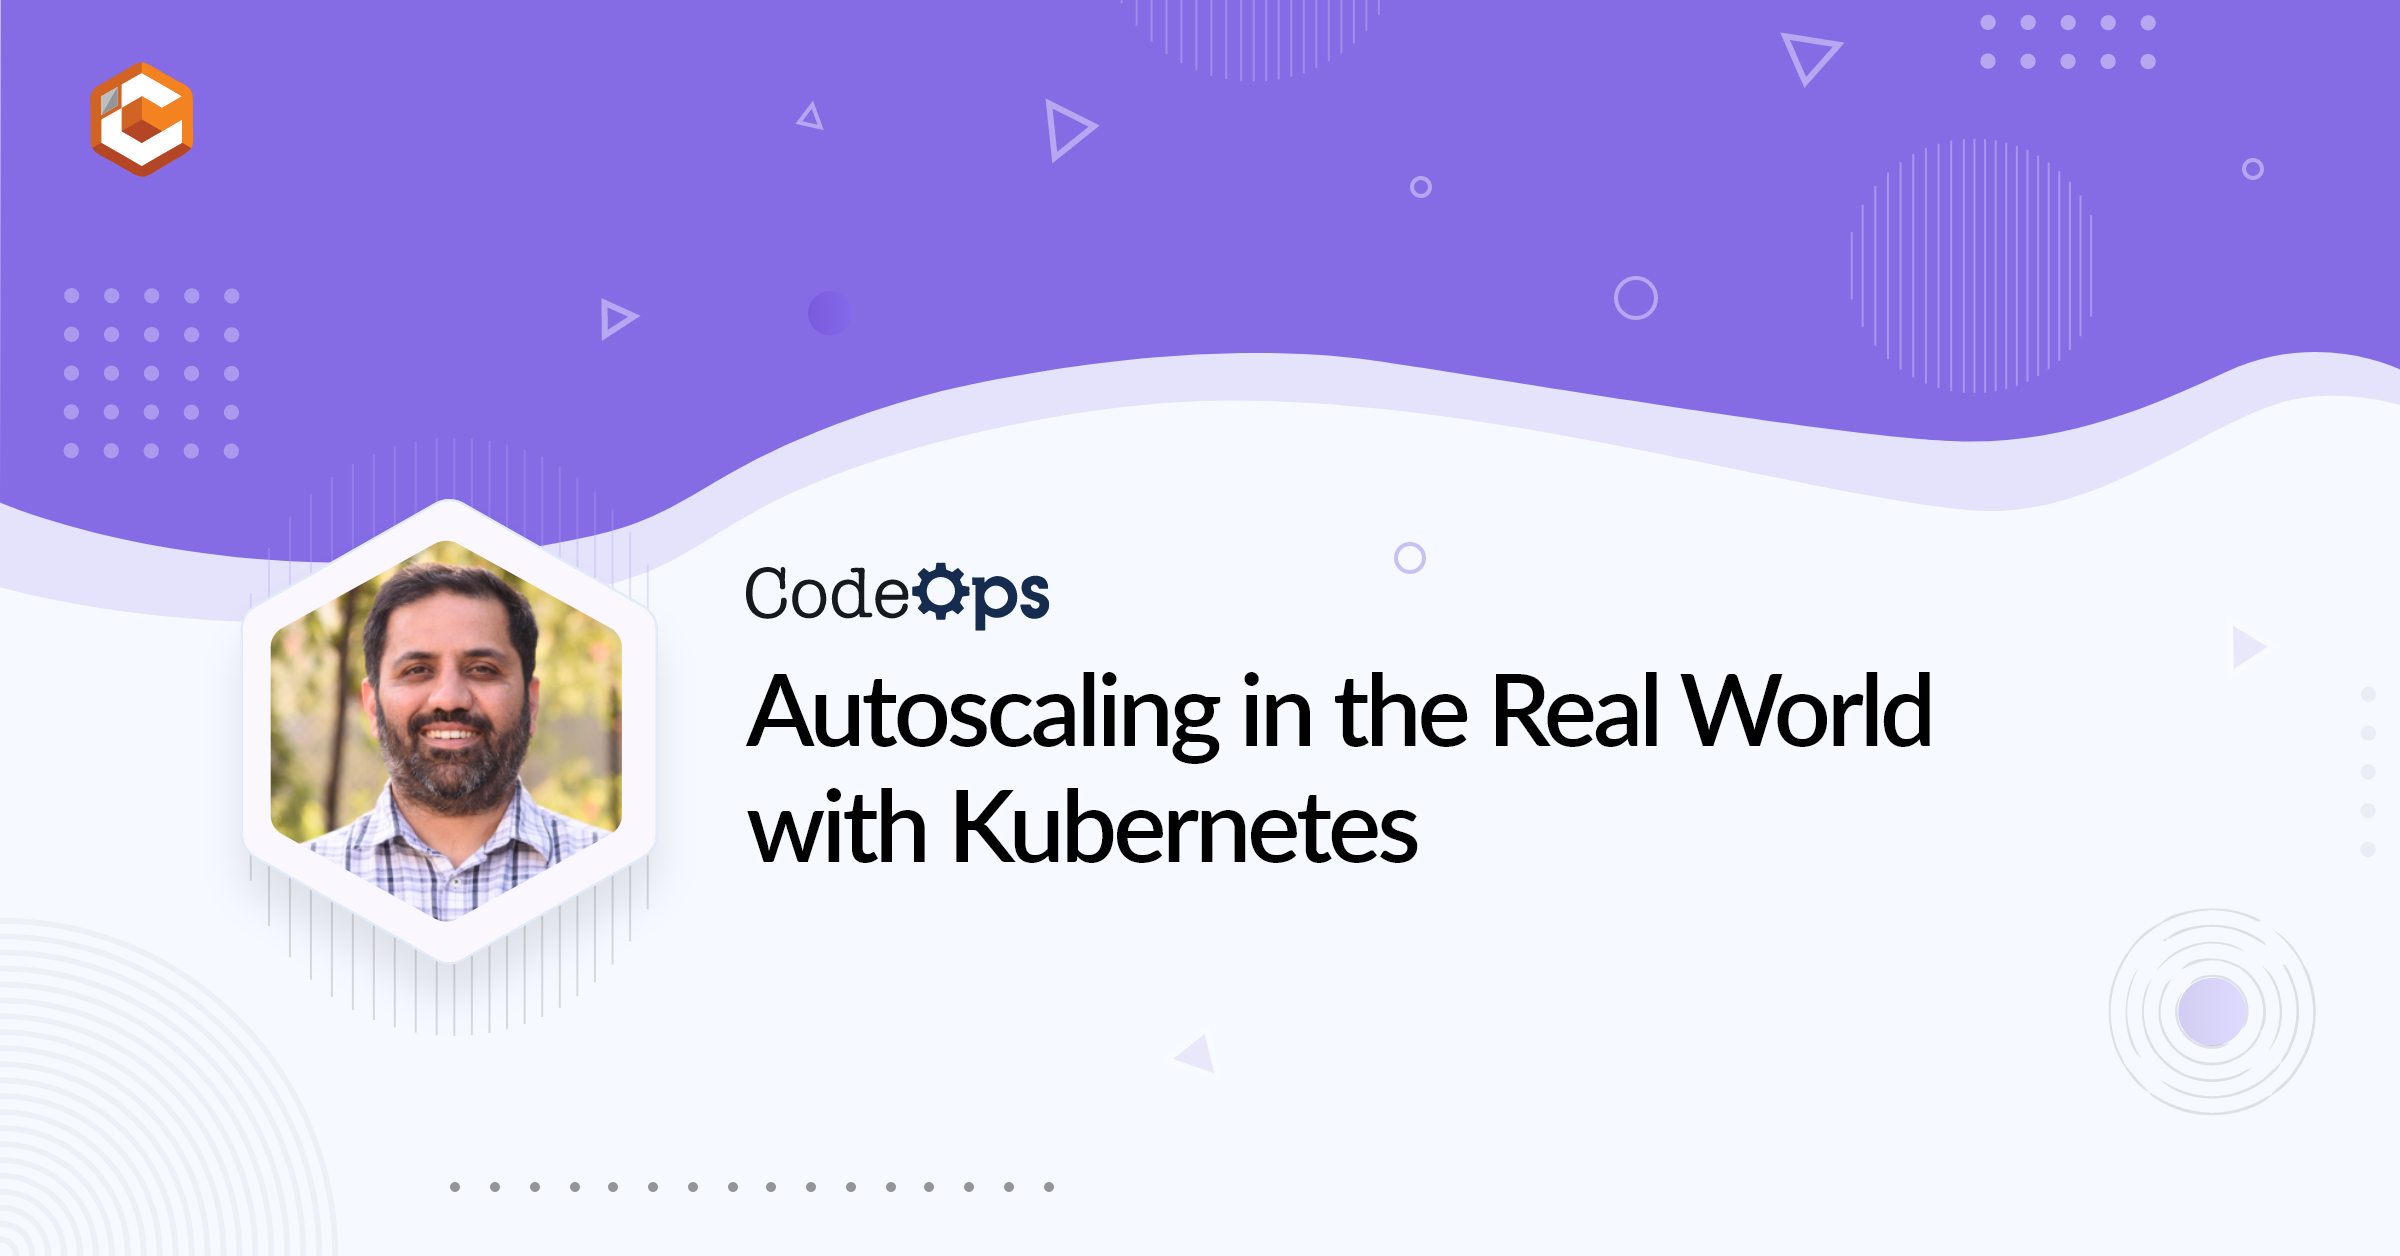 Autoscaling in the Real World with Kubernetes